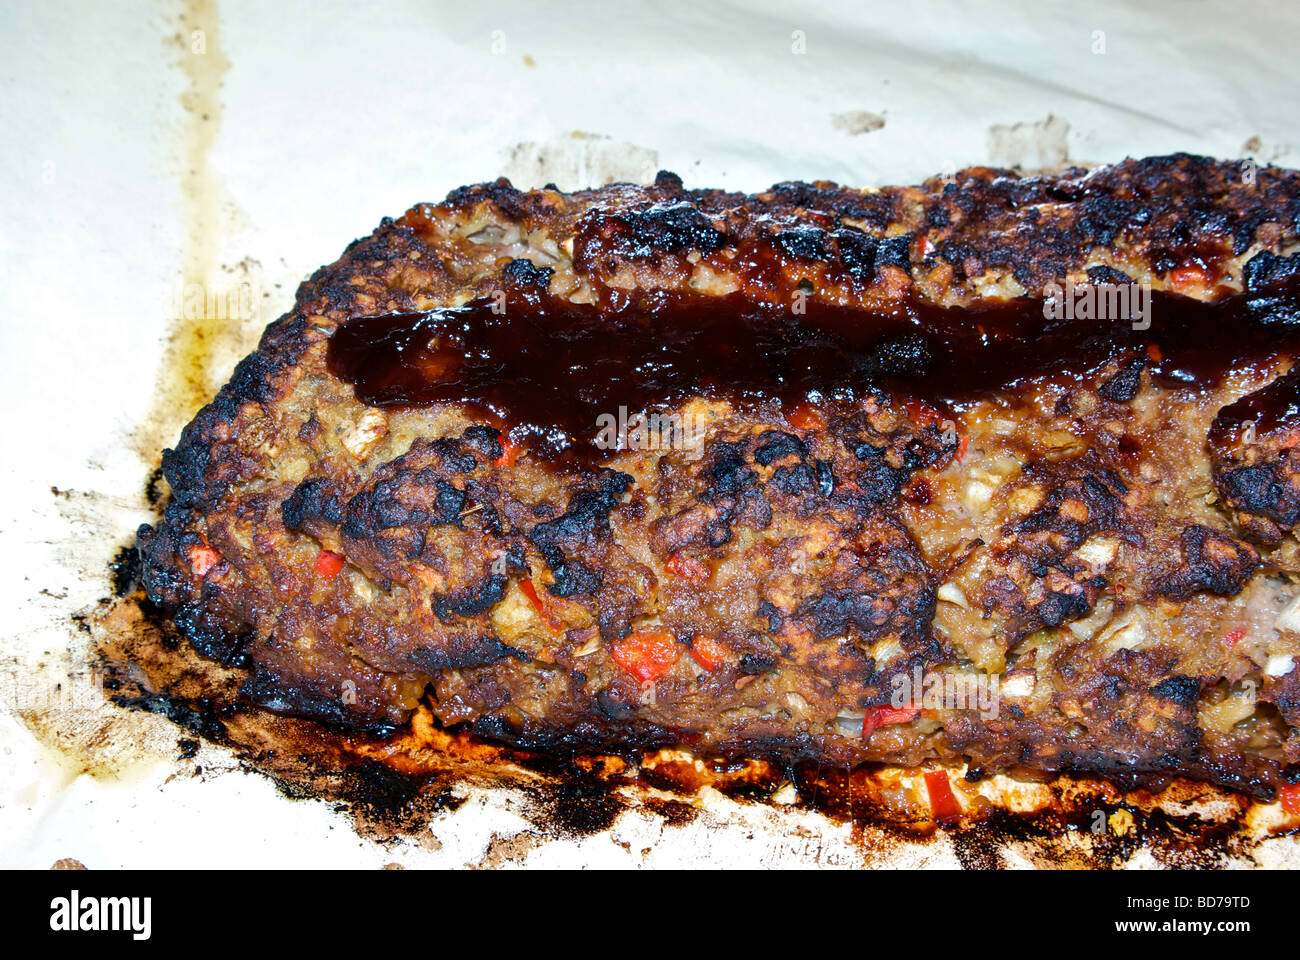 Crusty sweet glazed oven baked meatloaf on parchment paper Stock Photo